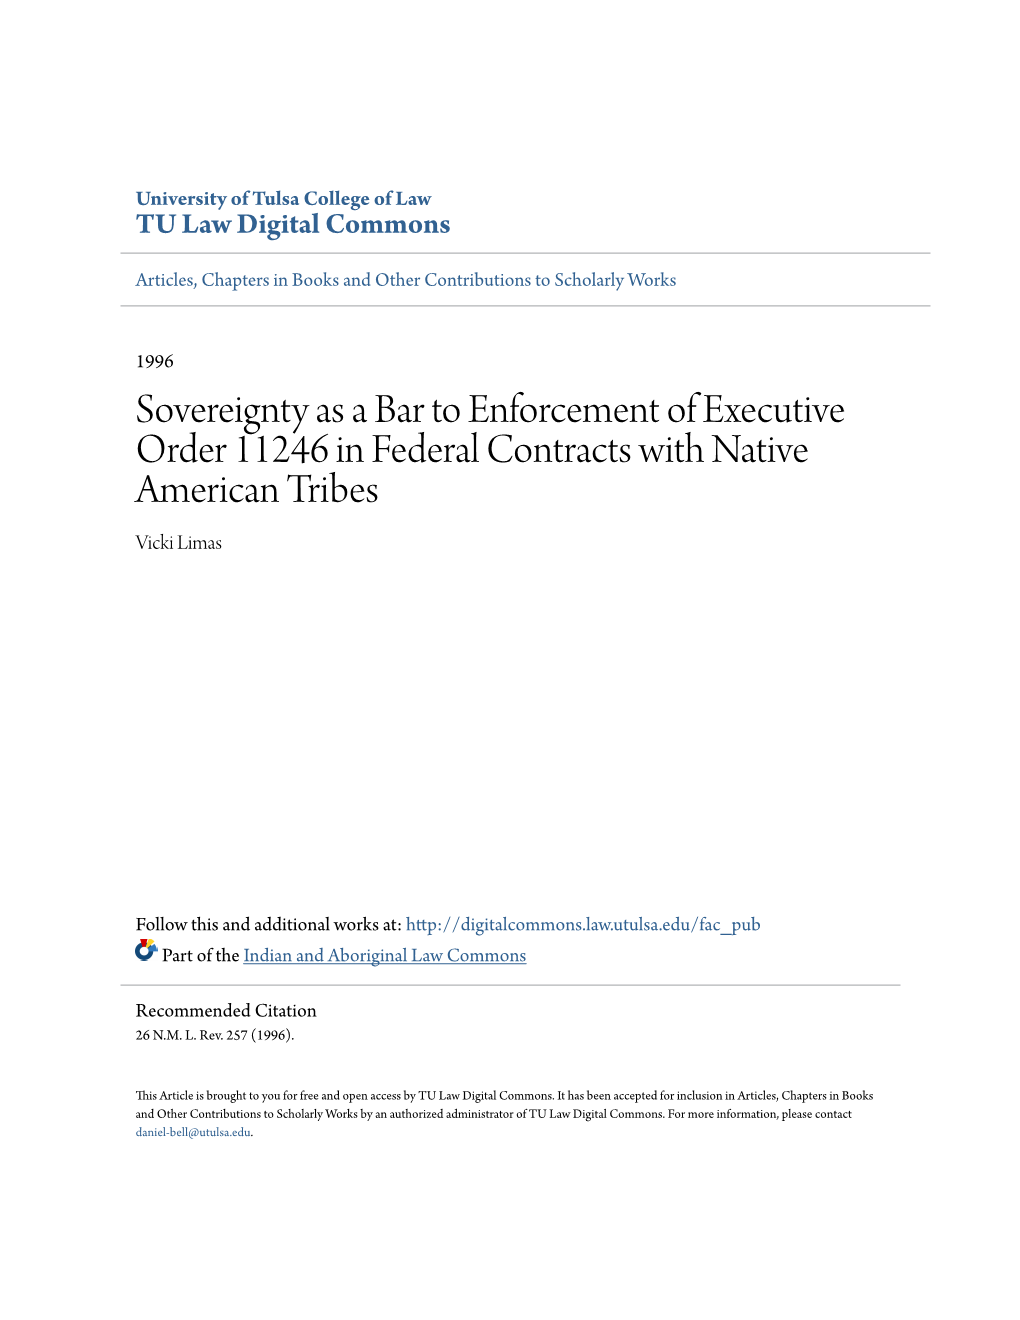 Sovereignty As a Bar to Enforcement of Executive Order 11246 in Federal Contracts with Native American Tribes Vicki Limas